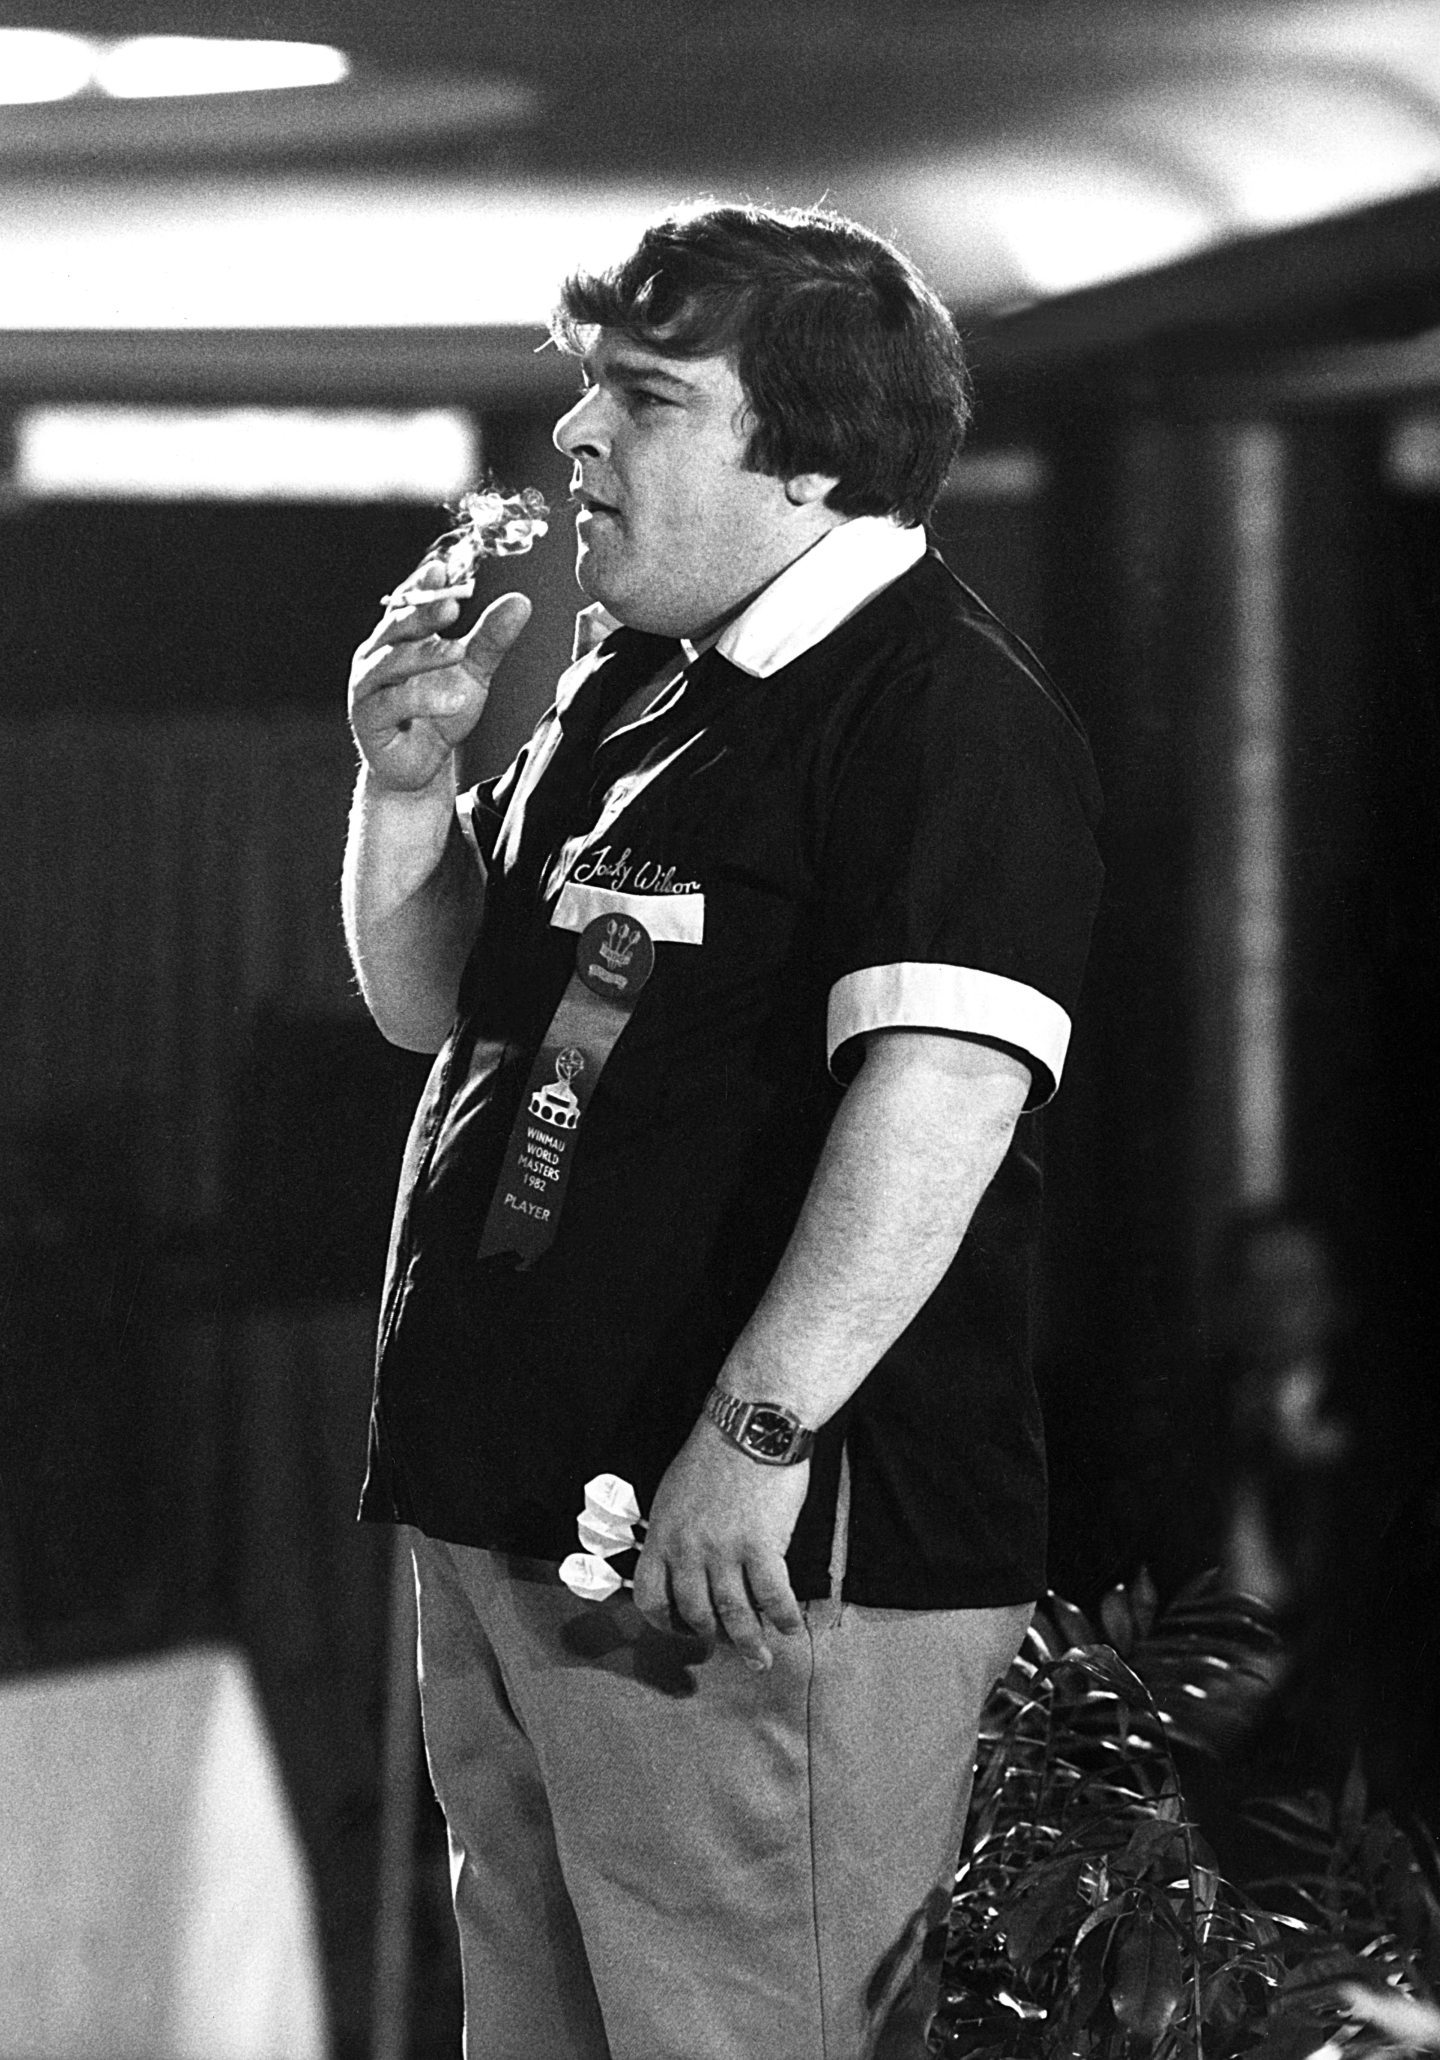 Jocky Wilson smokes a cigarette on stage during the 1982 Winmau World Masters. Image: Shutterstock.